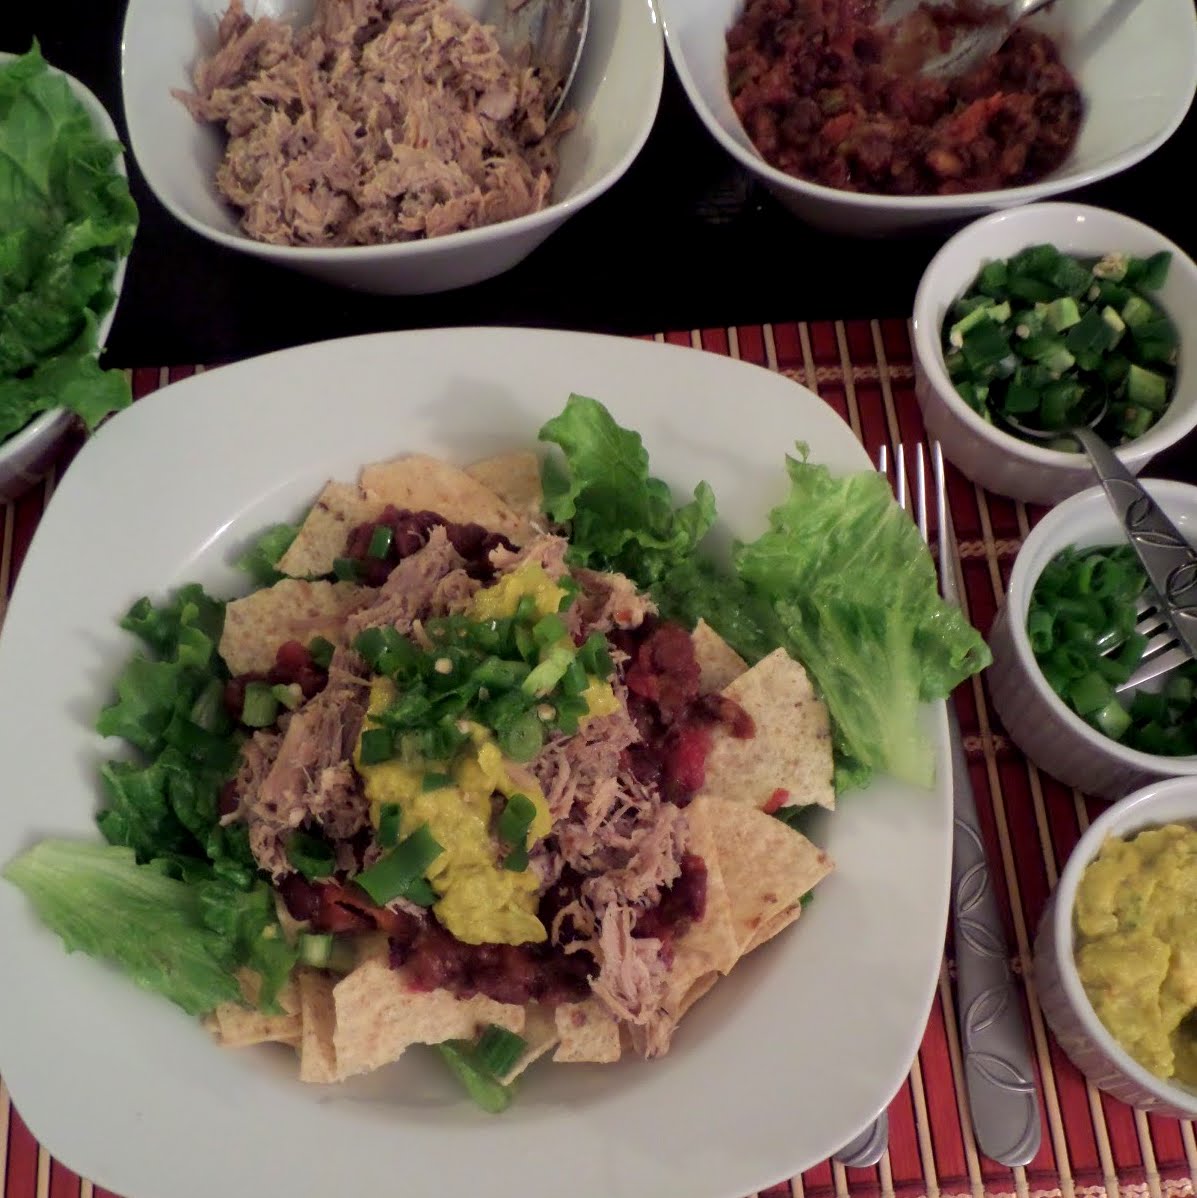 Pulled Pork Taco Salad:  A taco salad topped with spicy black beans, pulled pork, and avocado.